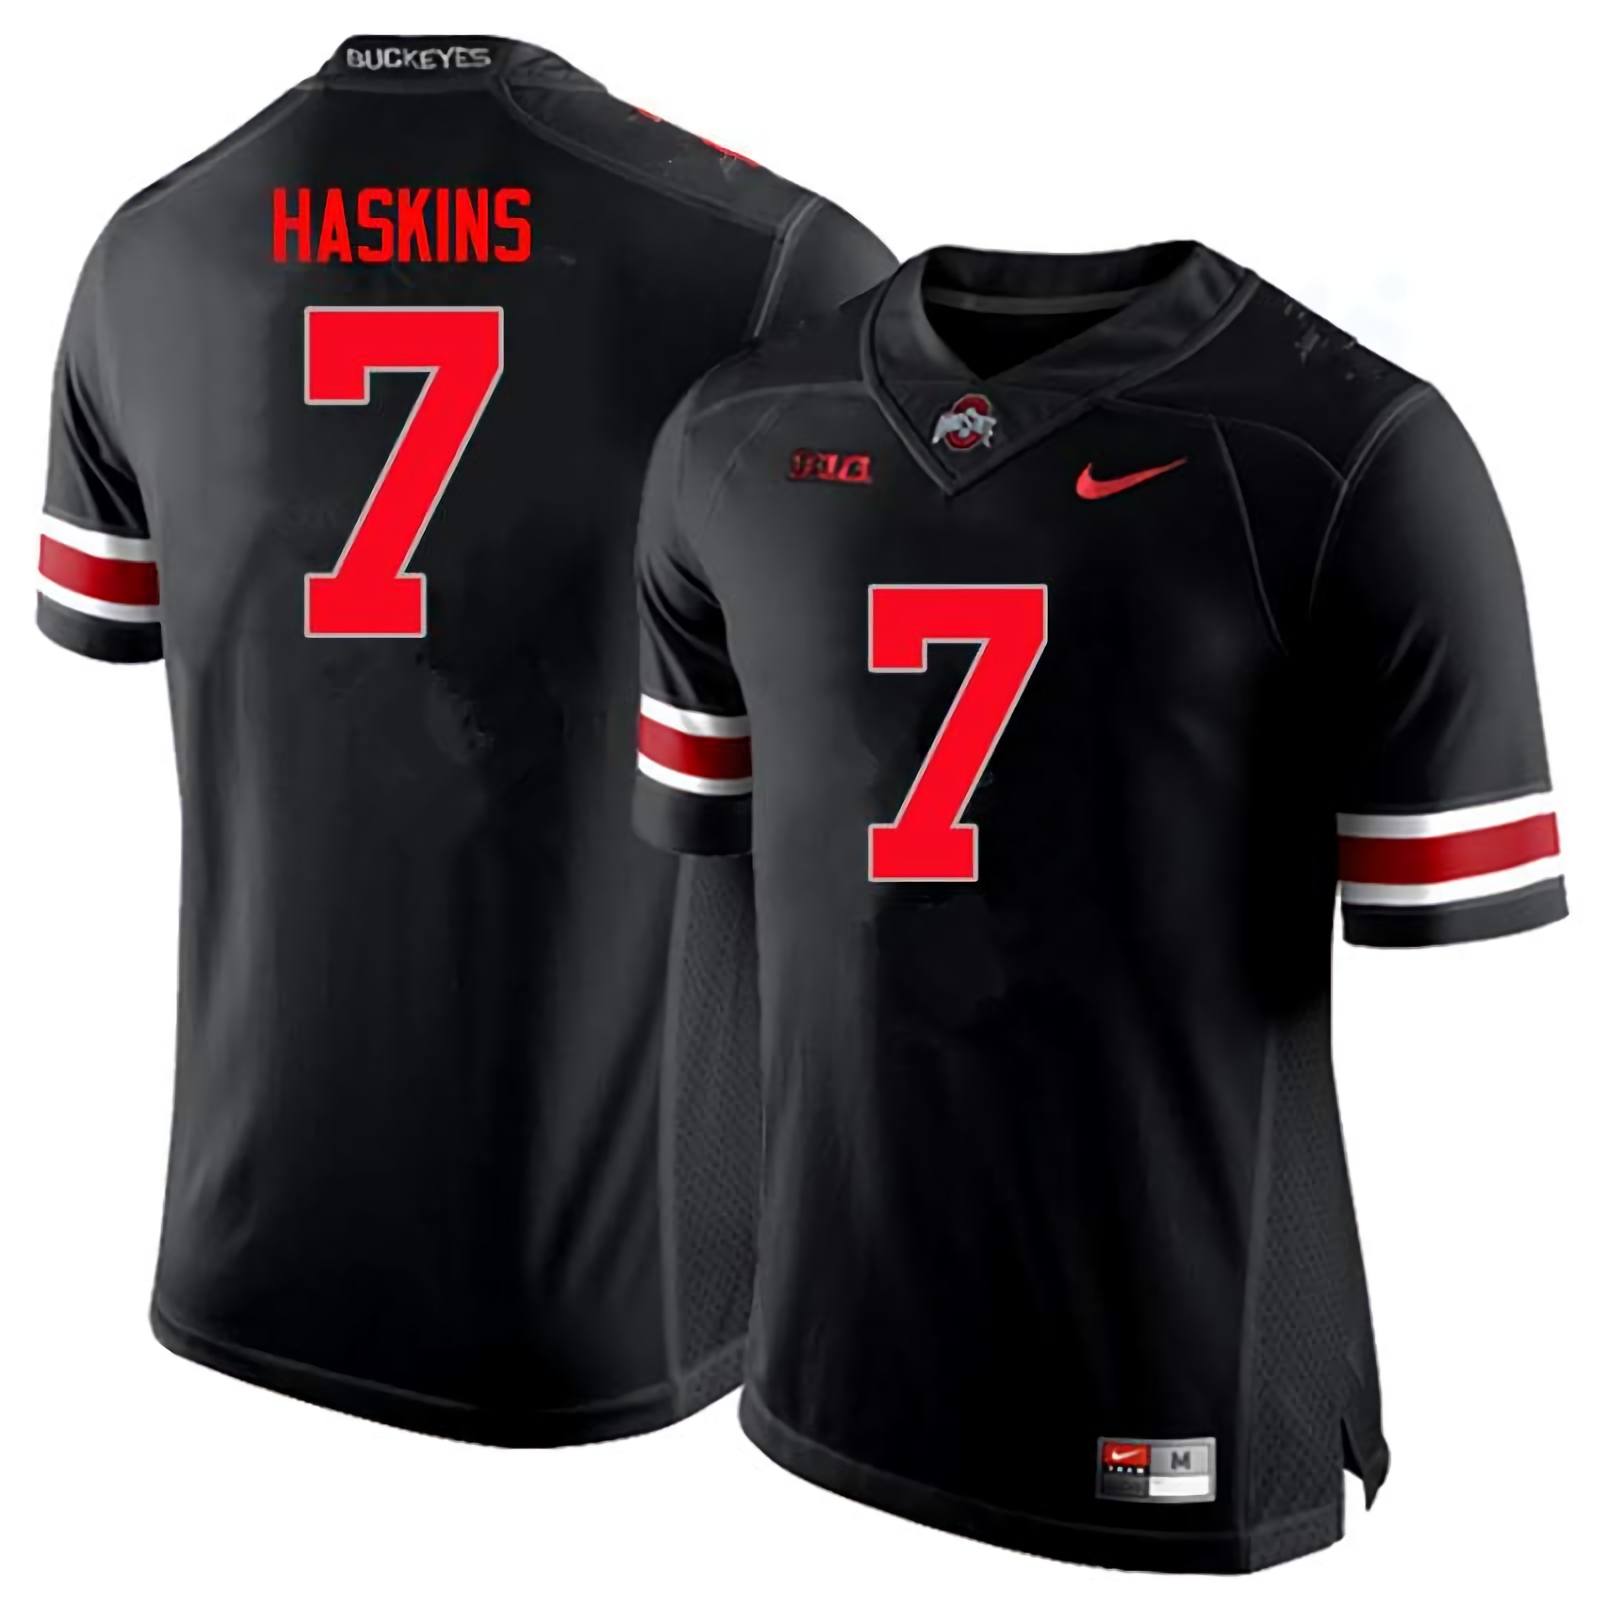 Dwayne Haskins Ohio State Buckeyes Men's NCAA #7 Nike Black Limited College Stitched Football Jersey LQP8656RL